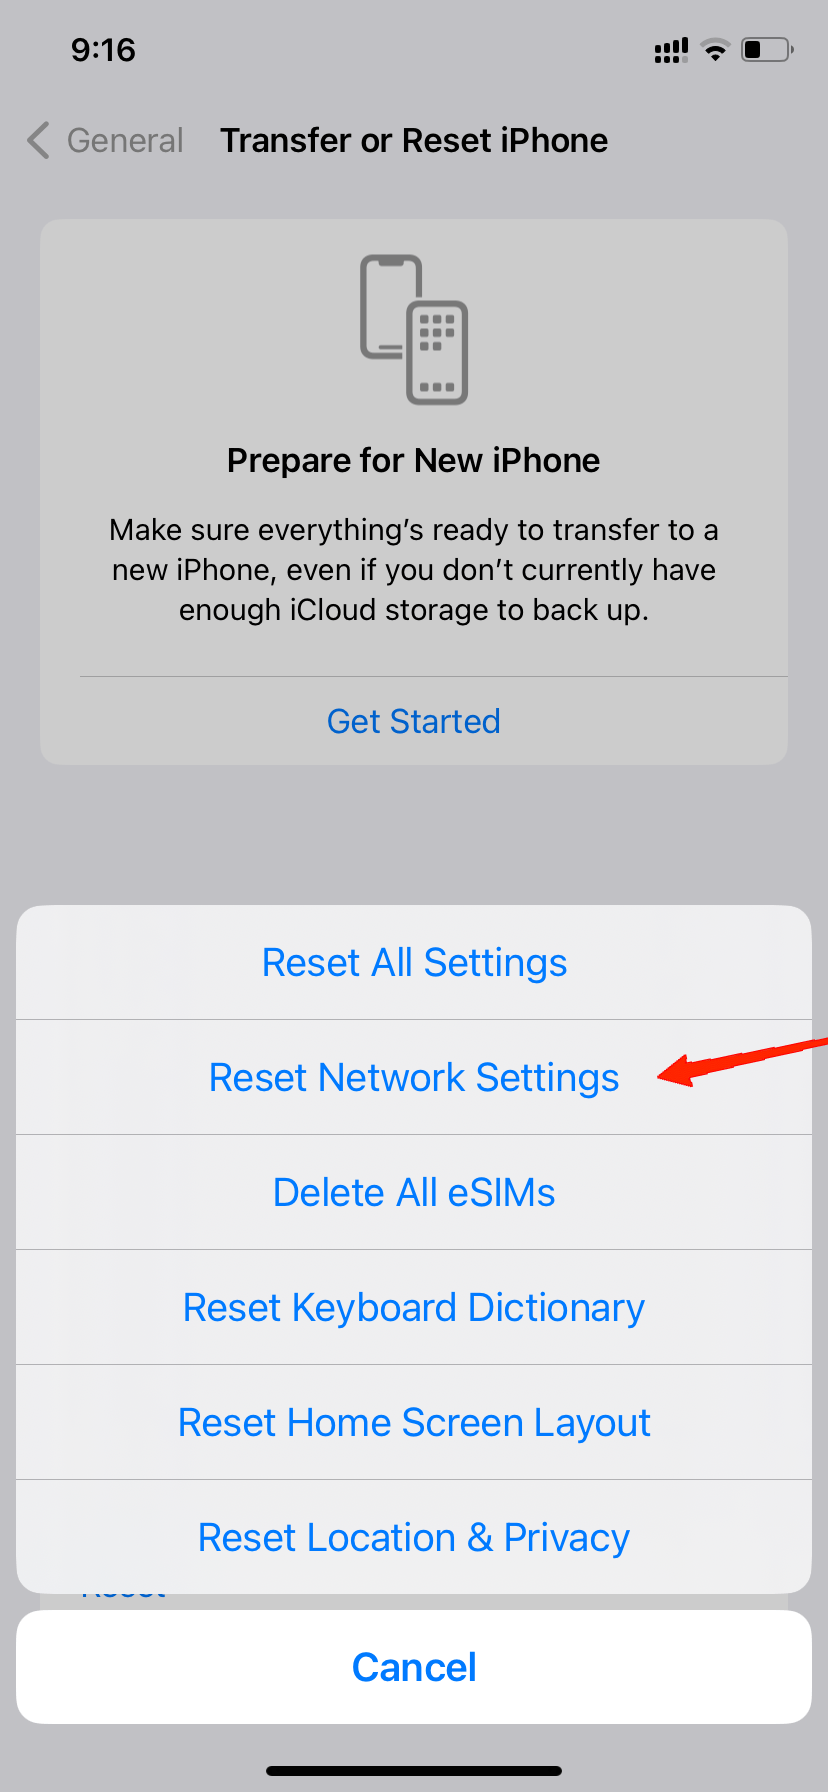 From the menu, select 'Reset Network Settings'.